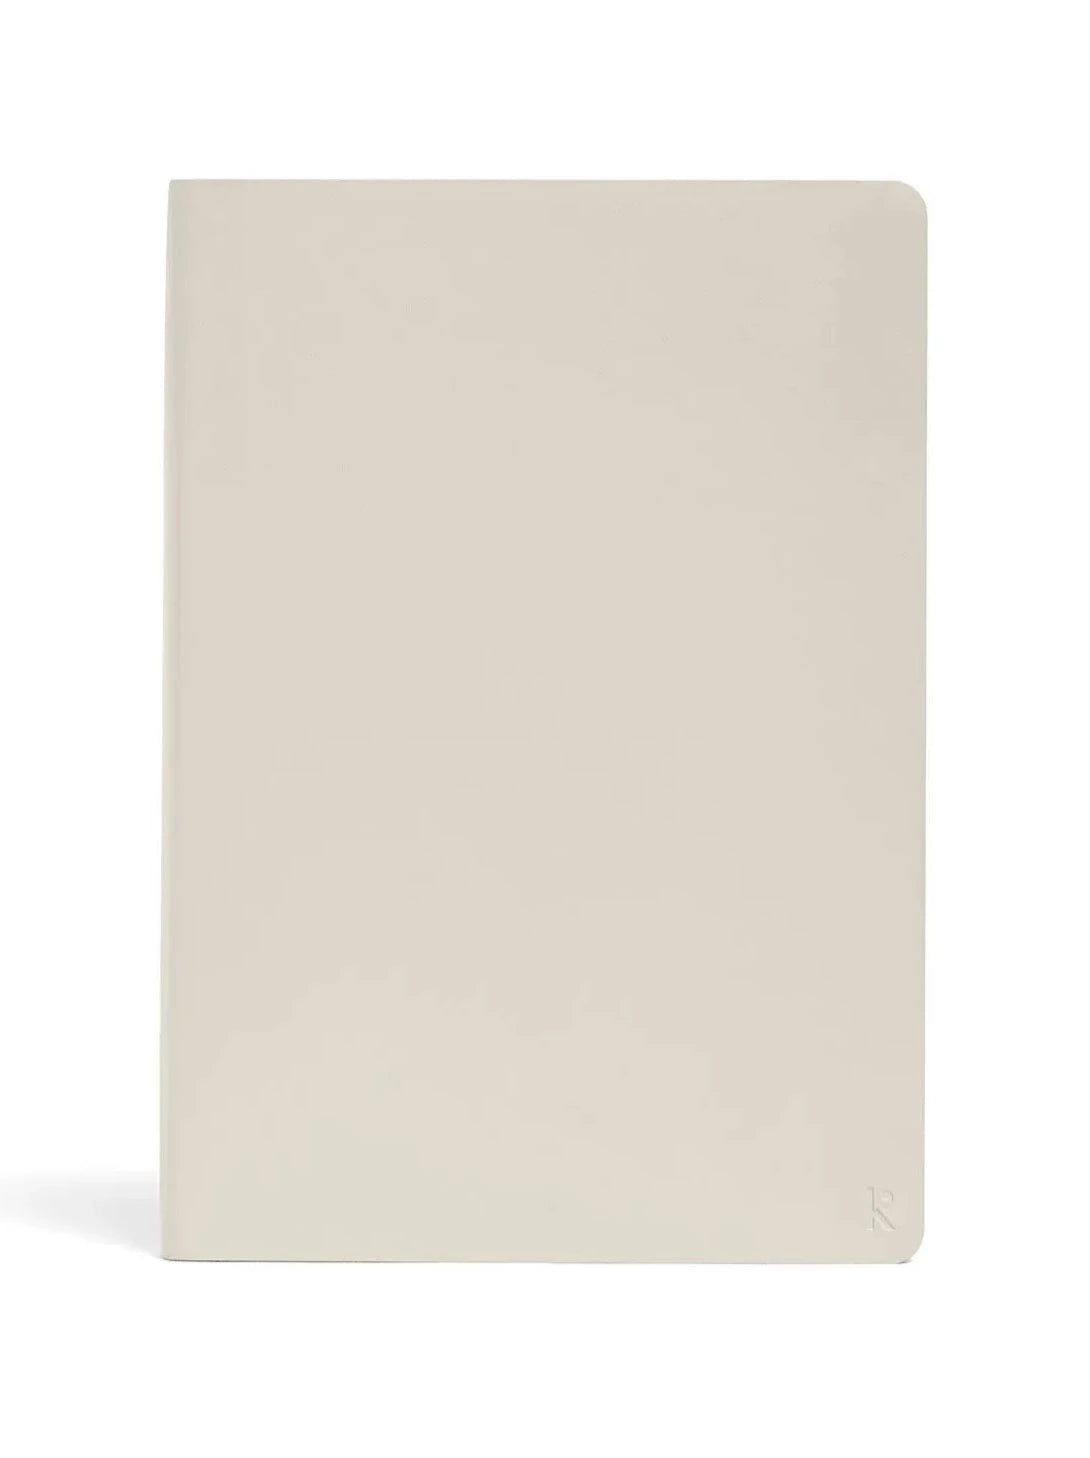 A Karst A5 Softcover Notebook – Stone on a white surface.